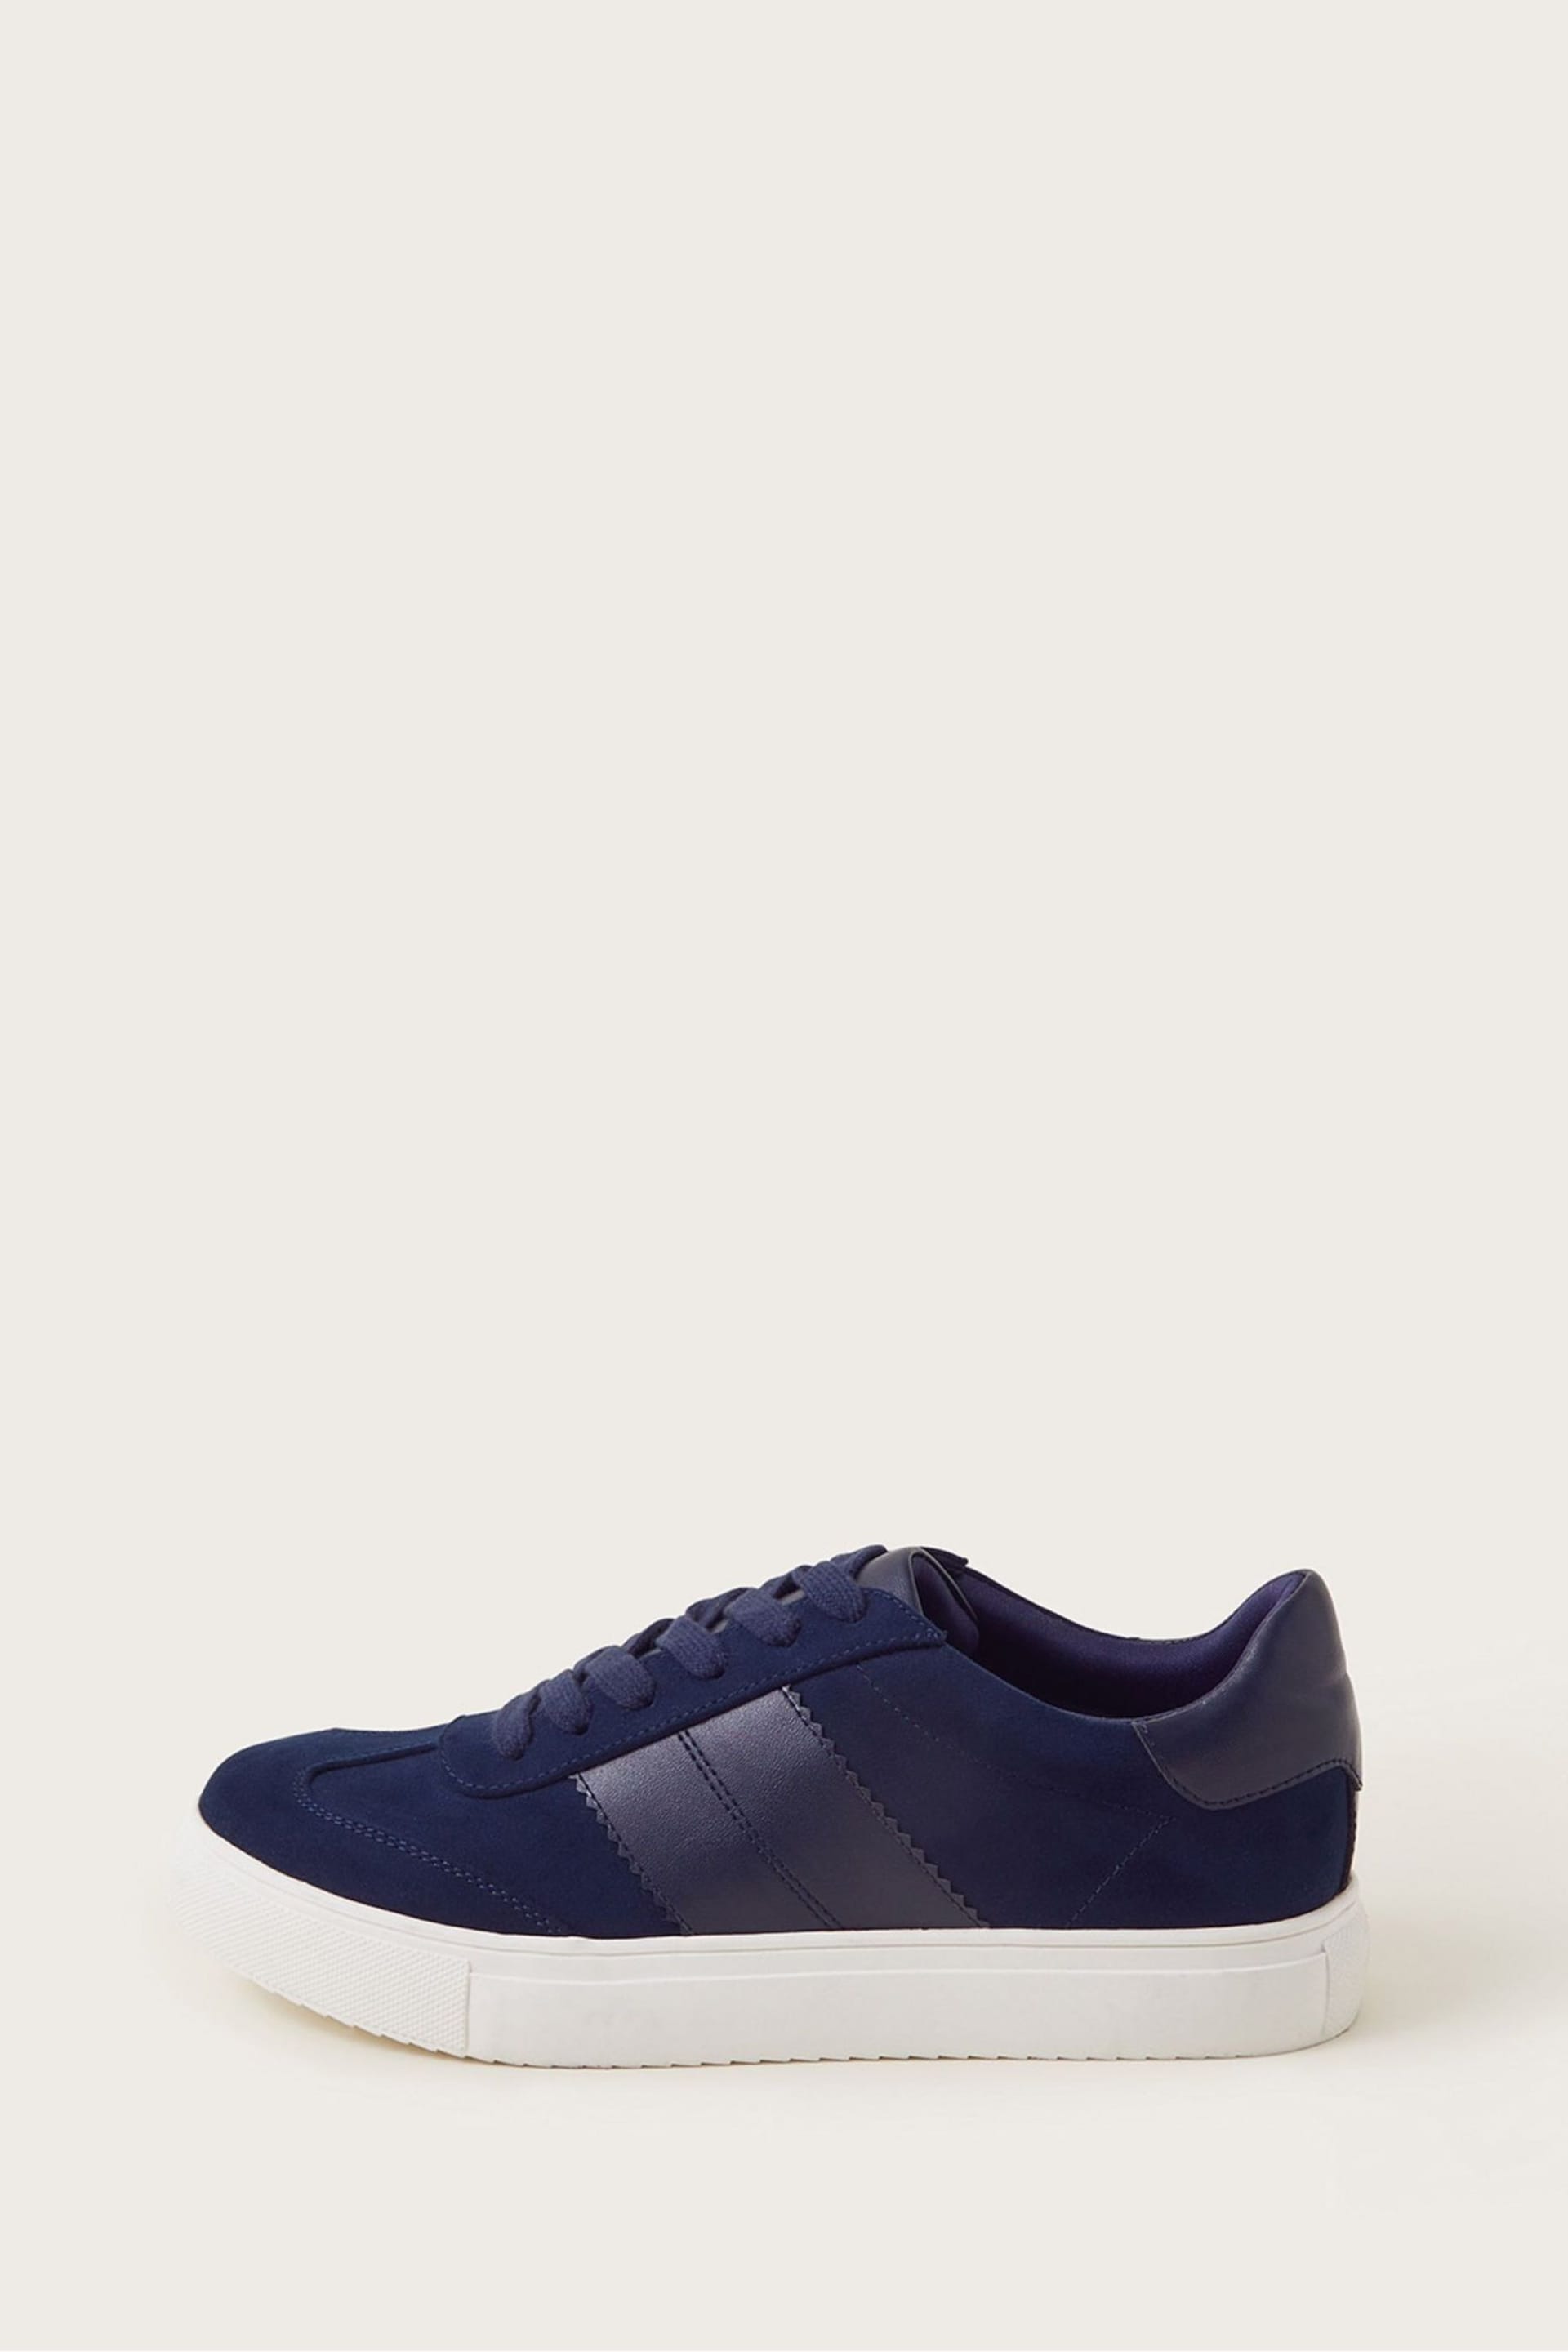 Monsoon Blue Faux Suede Trainers - Image 1 of 3